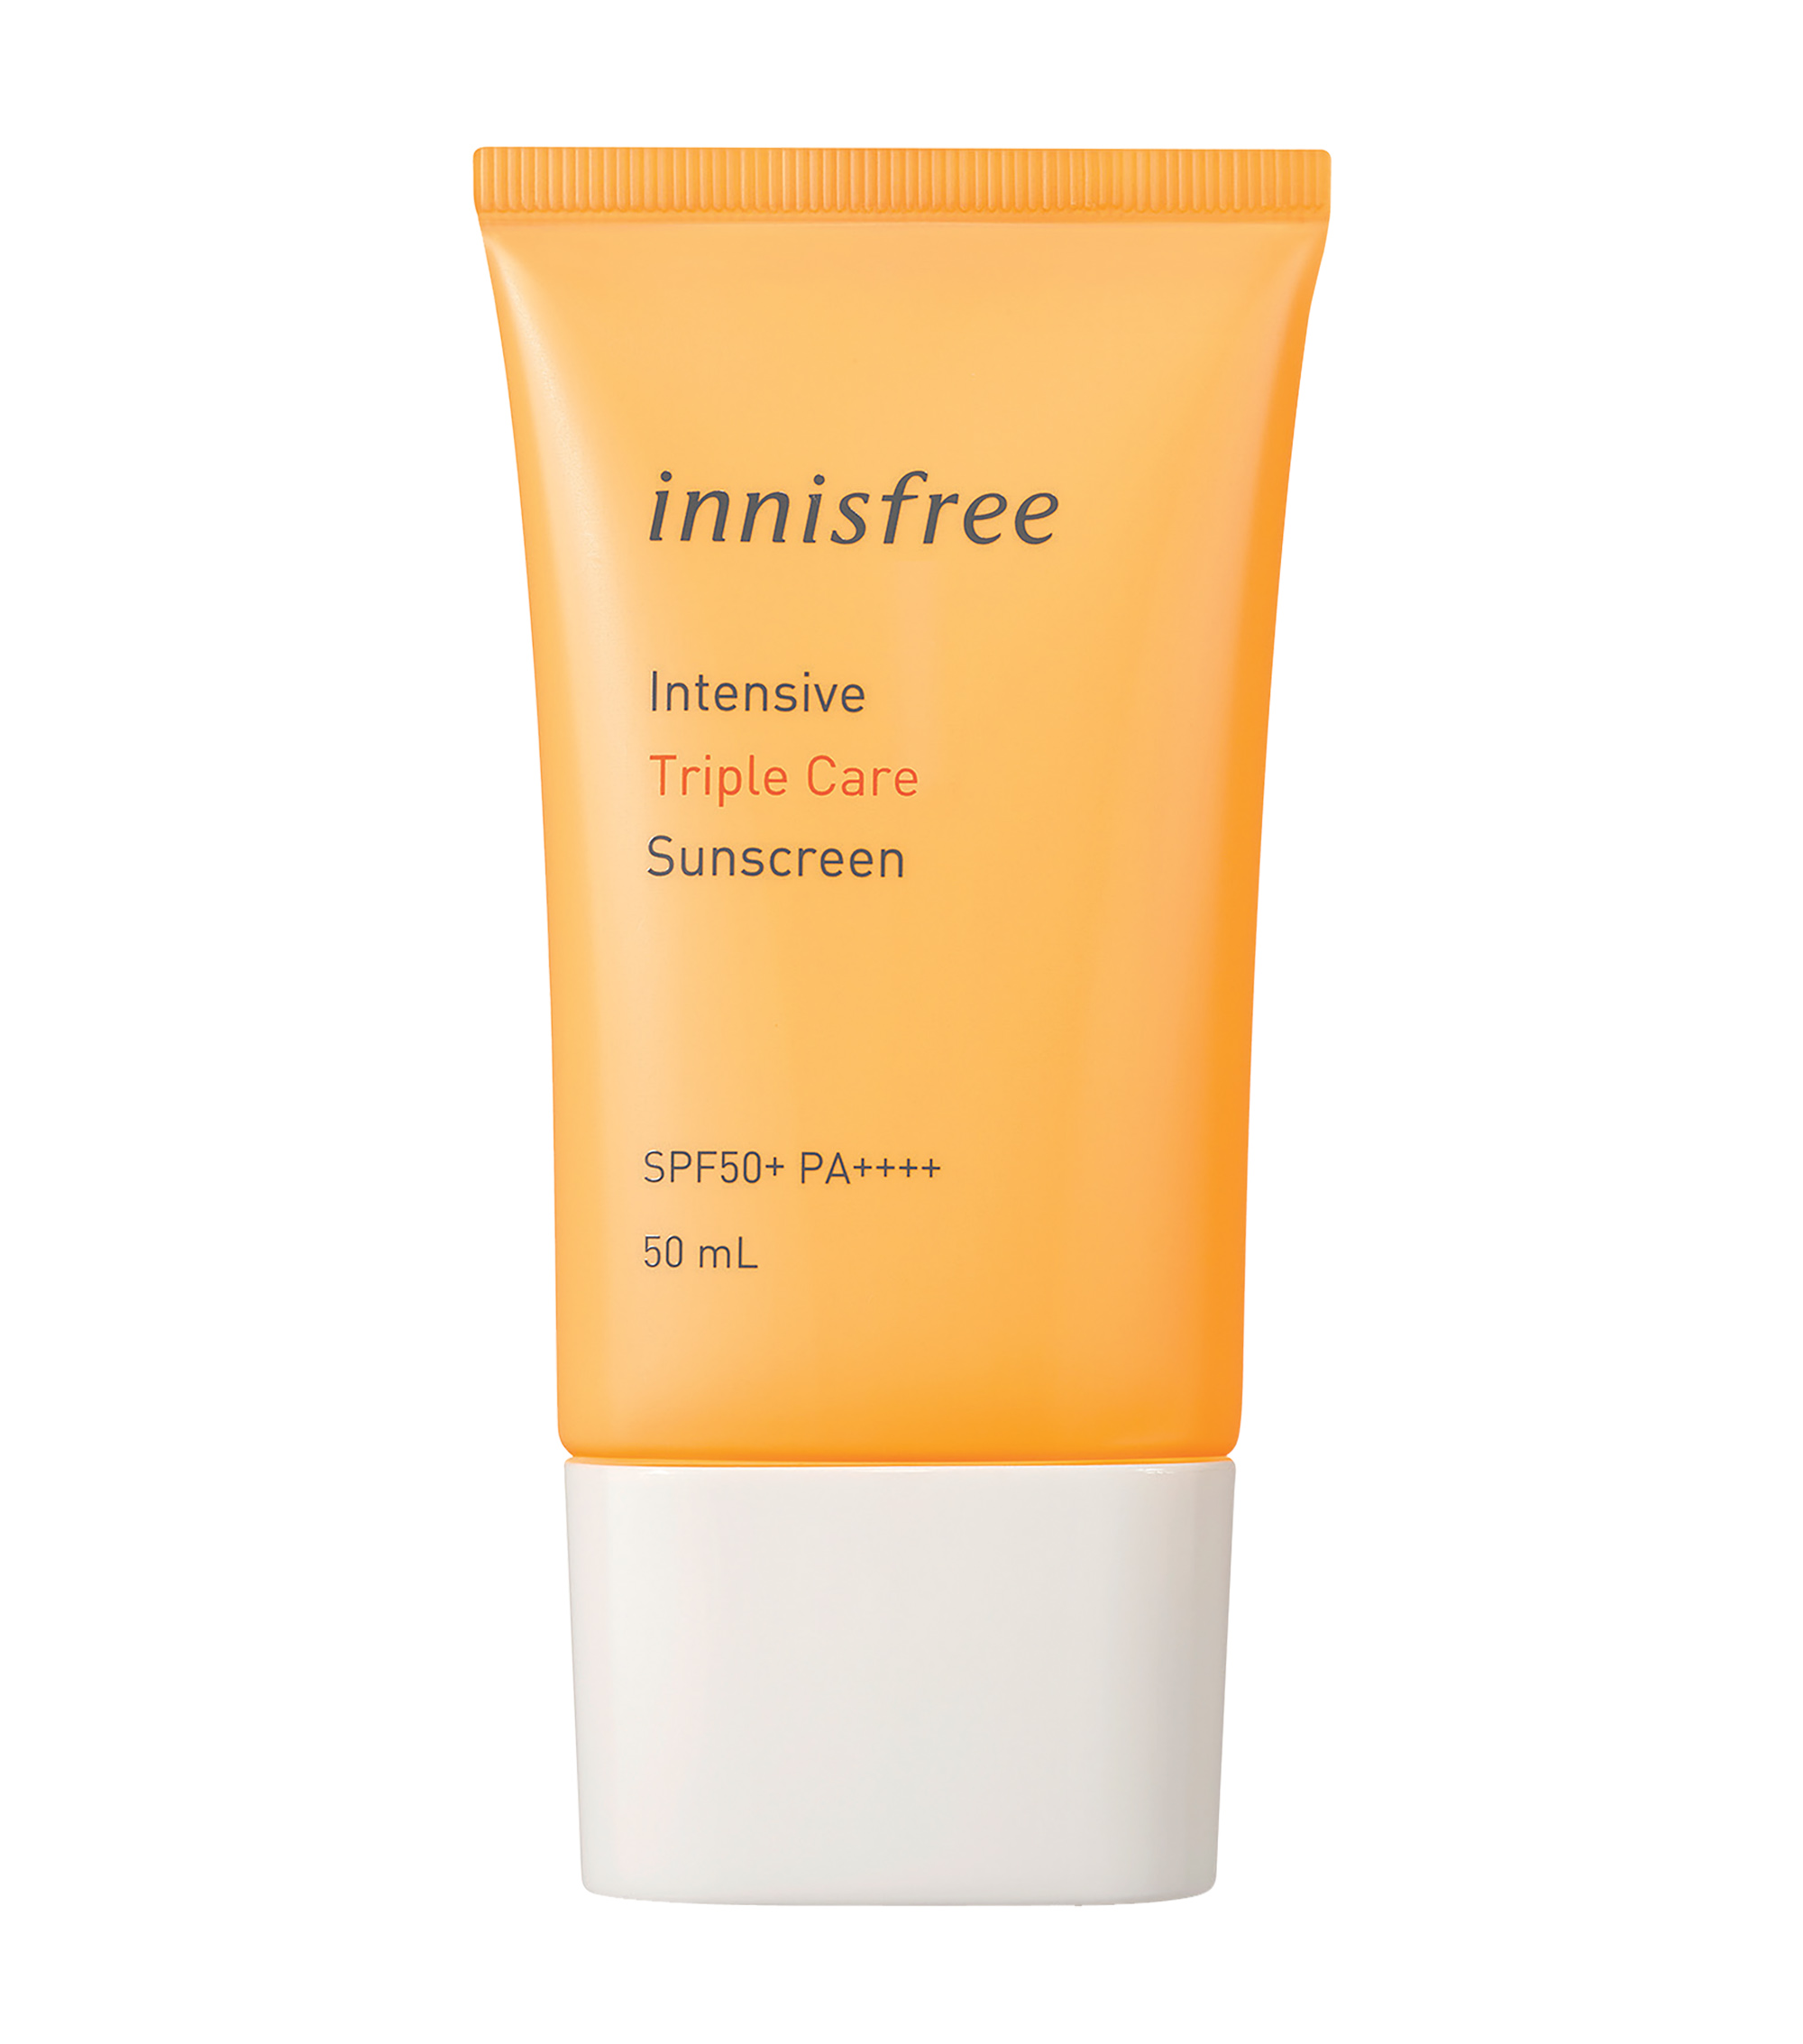 kem chống nắng Intensive Triple Care Innisfree